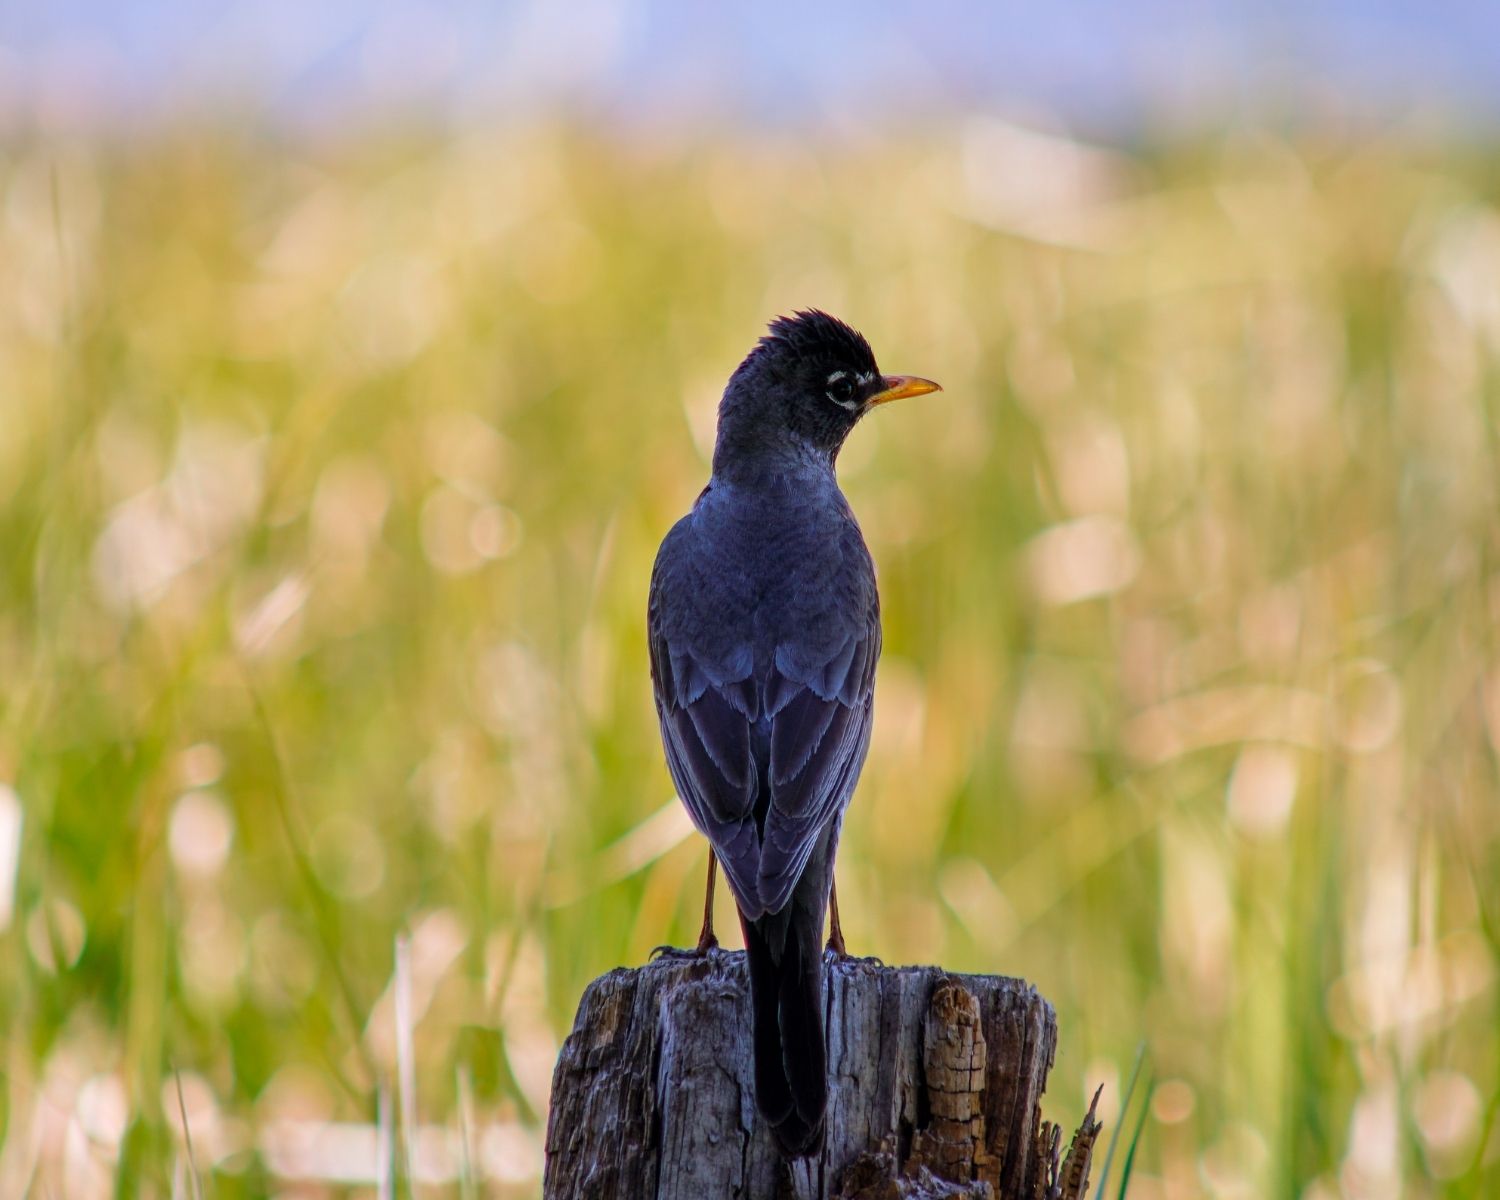 An blurry image of long grass with a bird perched on wood in focus